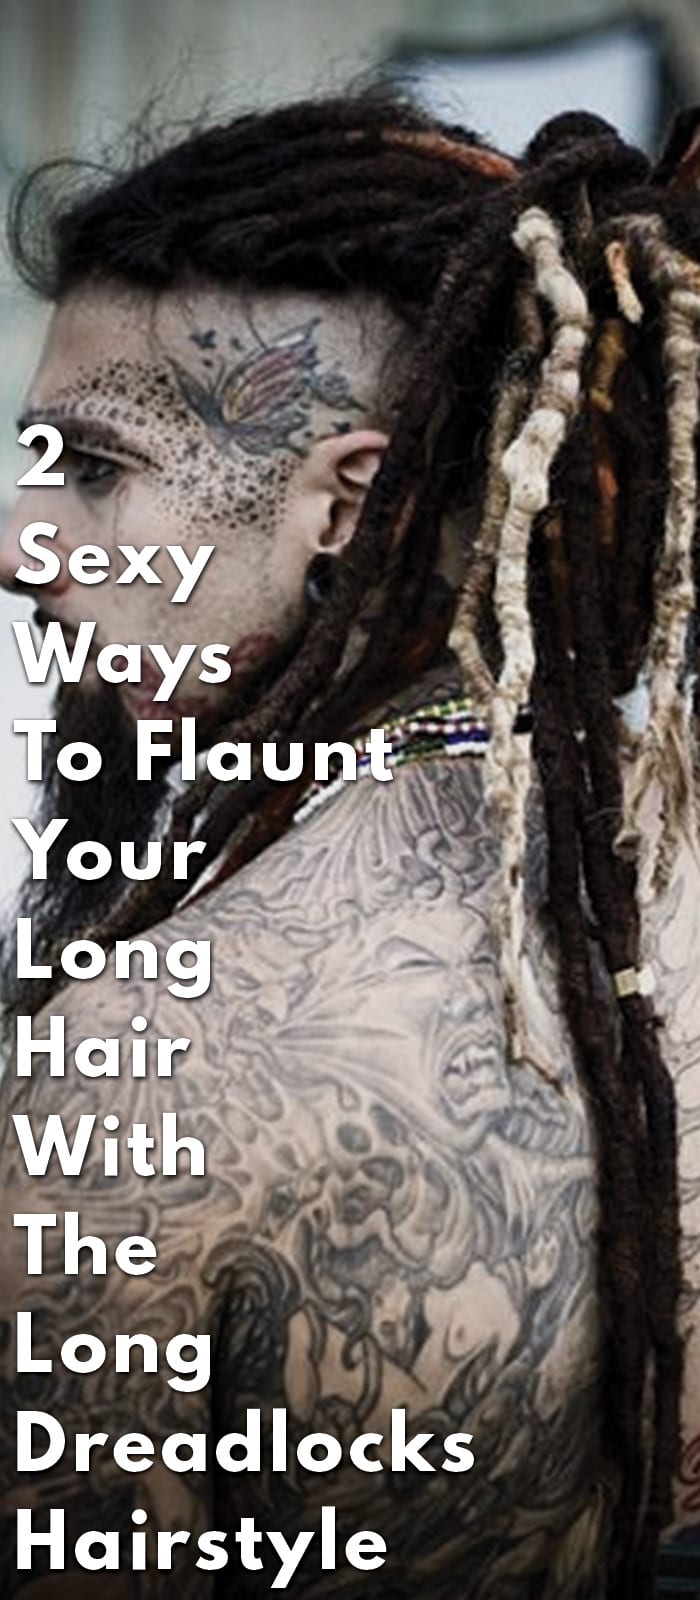 2 Sexy Ways To Flaunt Your Long Hair With The Long Dreadlocks Hairstyle